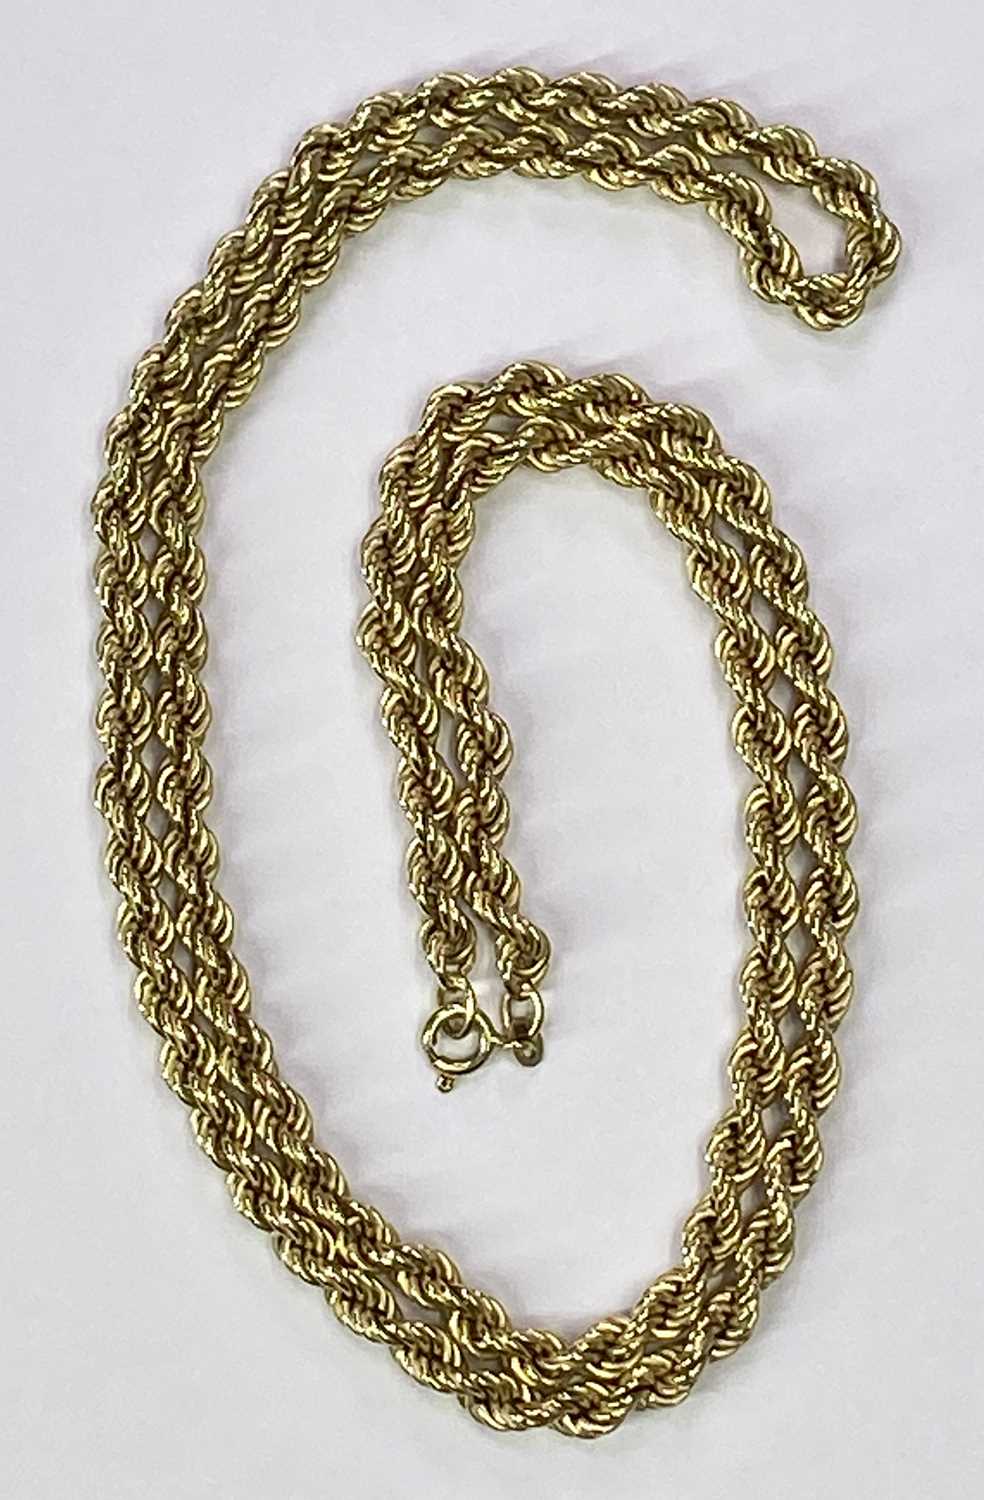 14CT GOLD ROPE TWIST NECKLACE - 76cms L, 24.1grms - Image 3 of 4